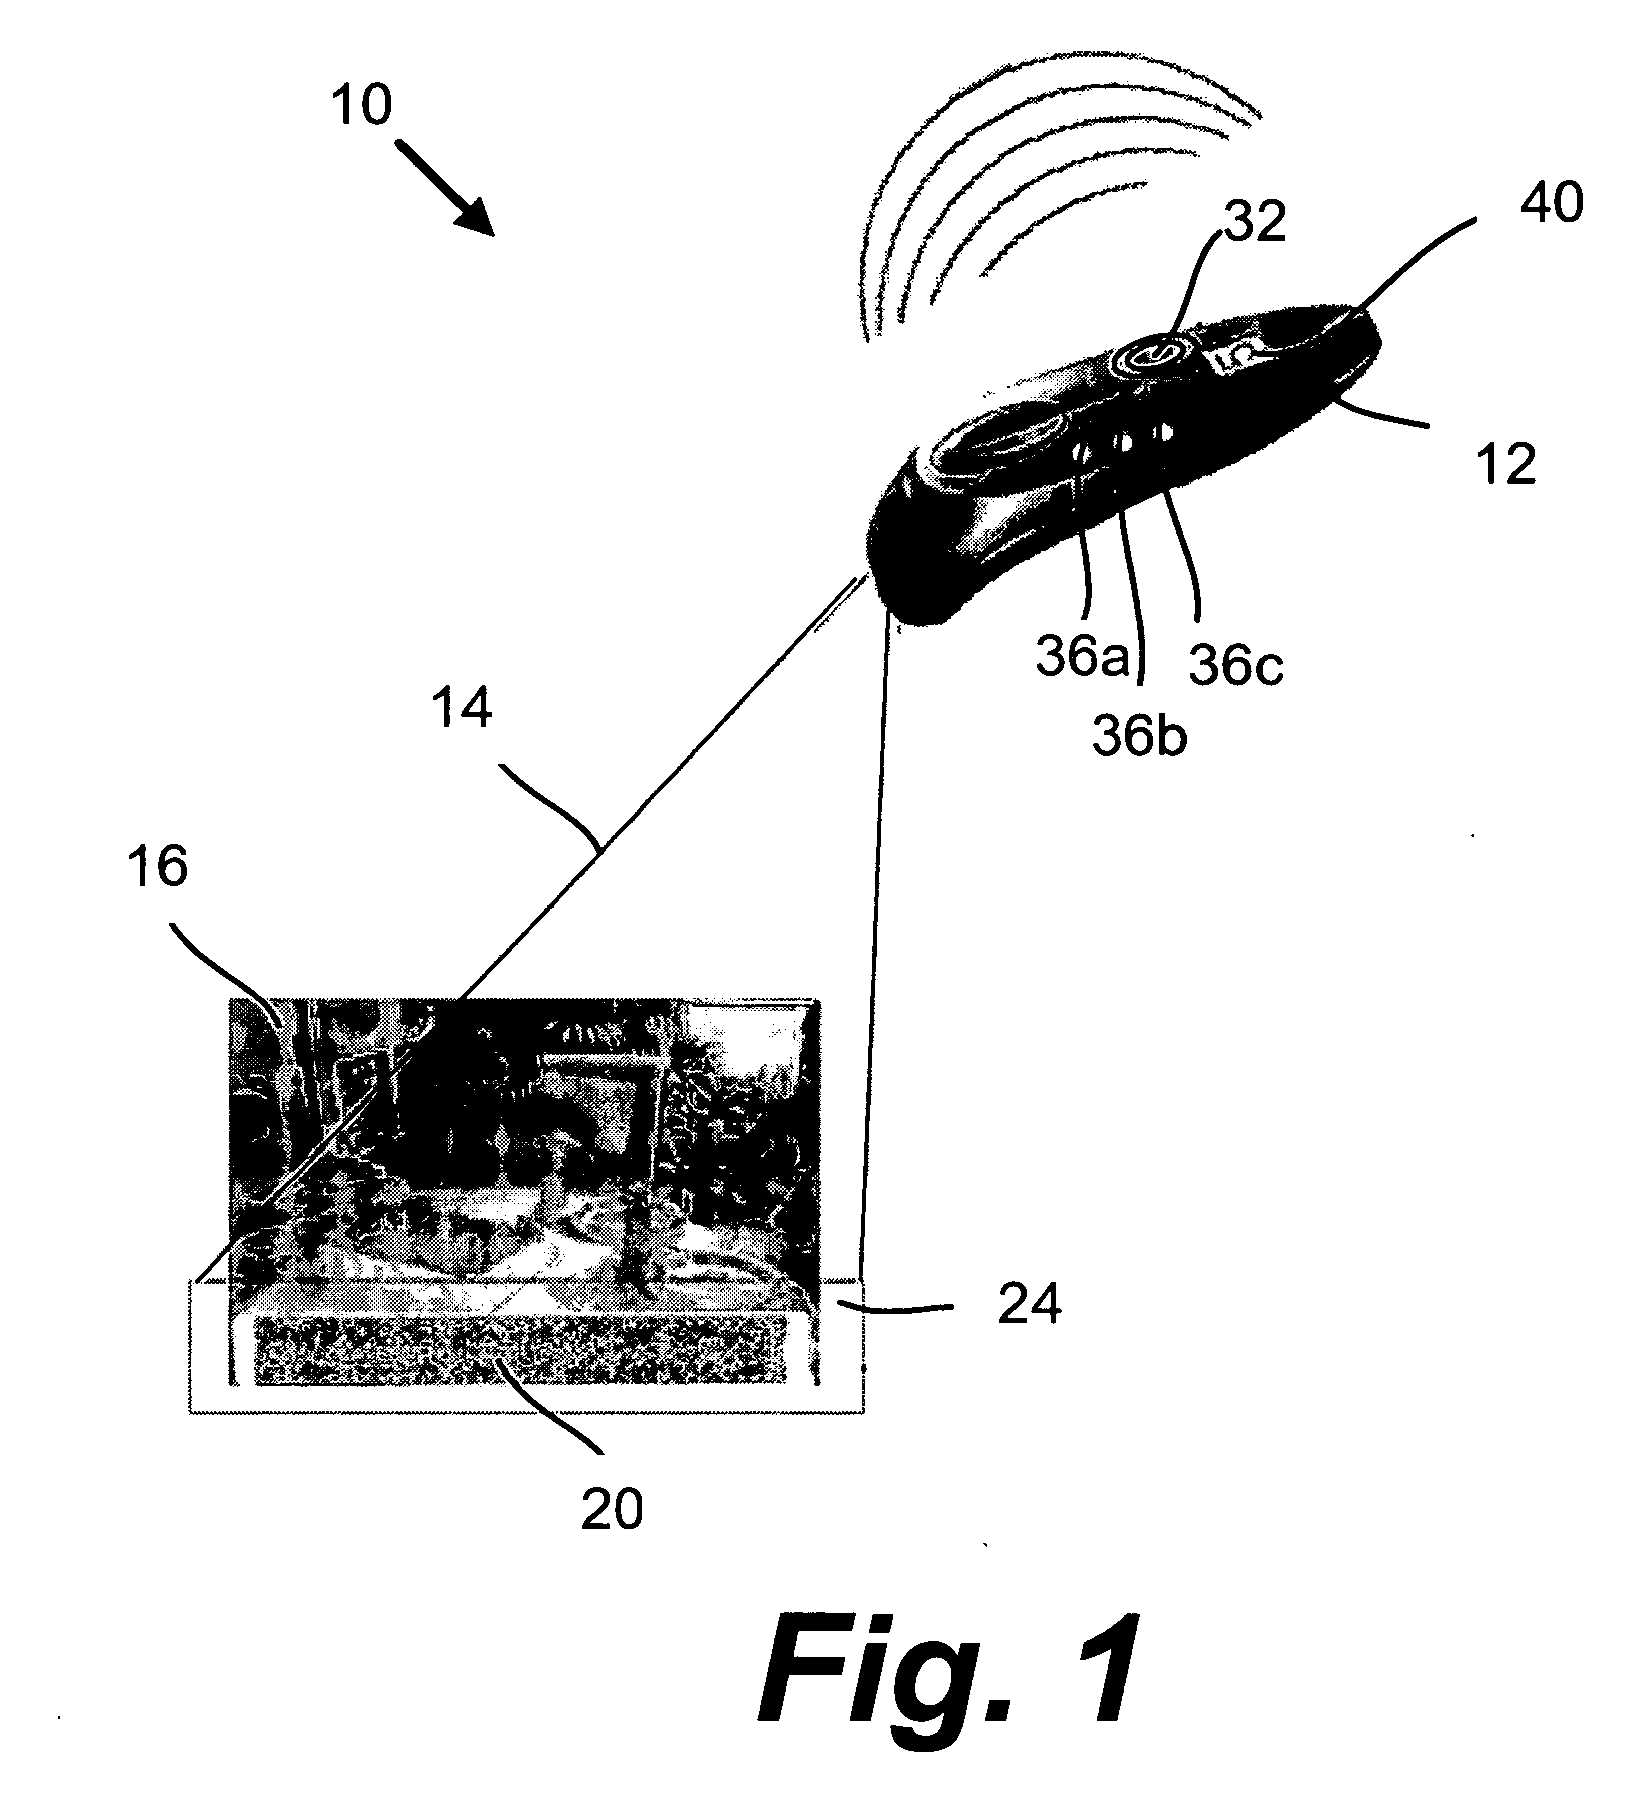 Systems and methods for generating, reading and transferring identifiers